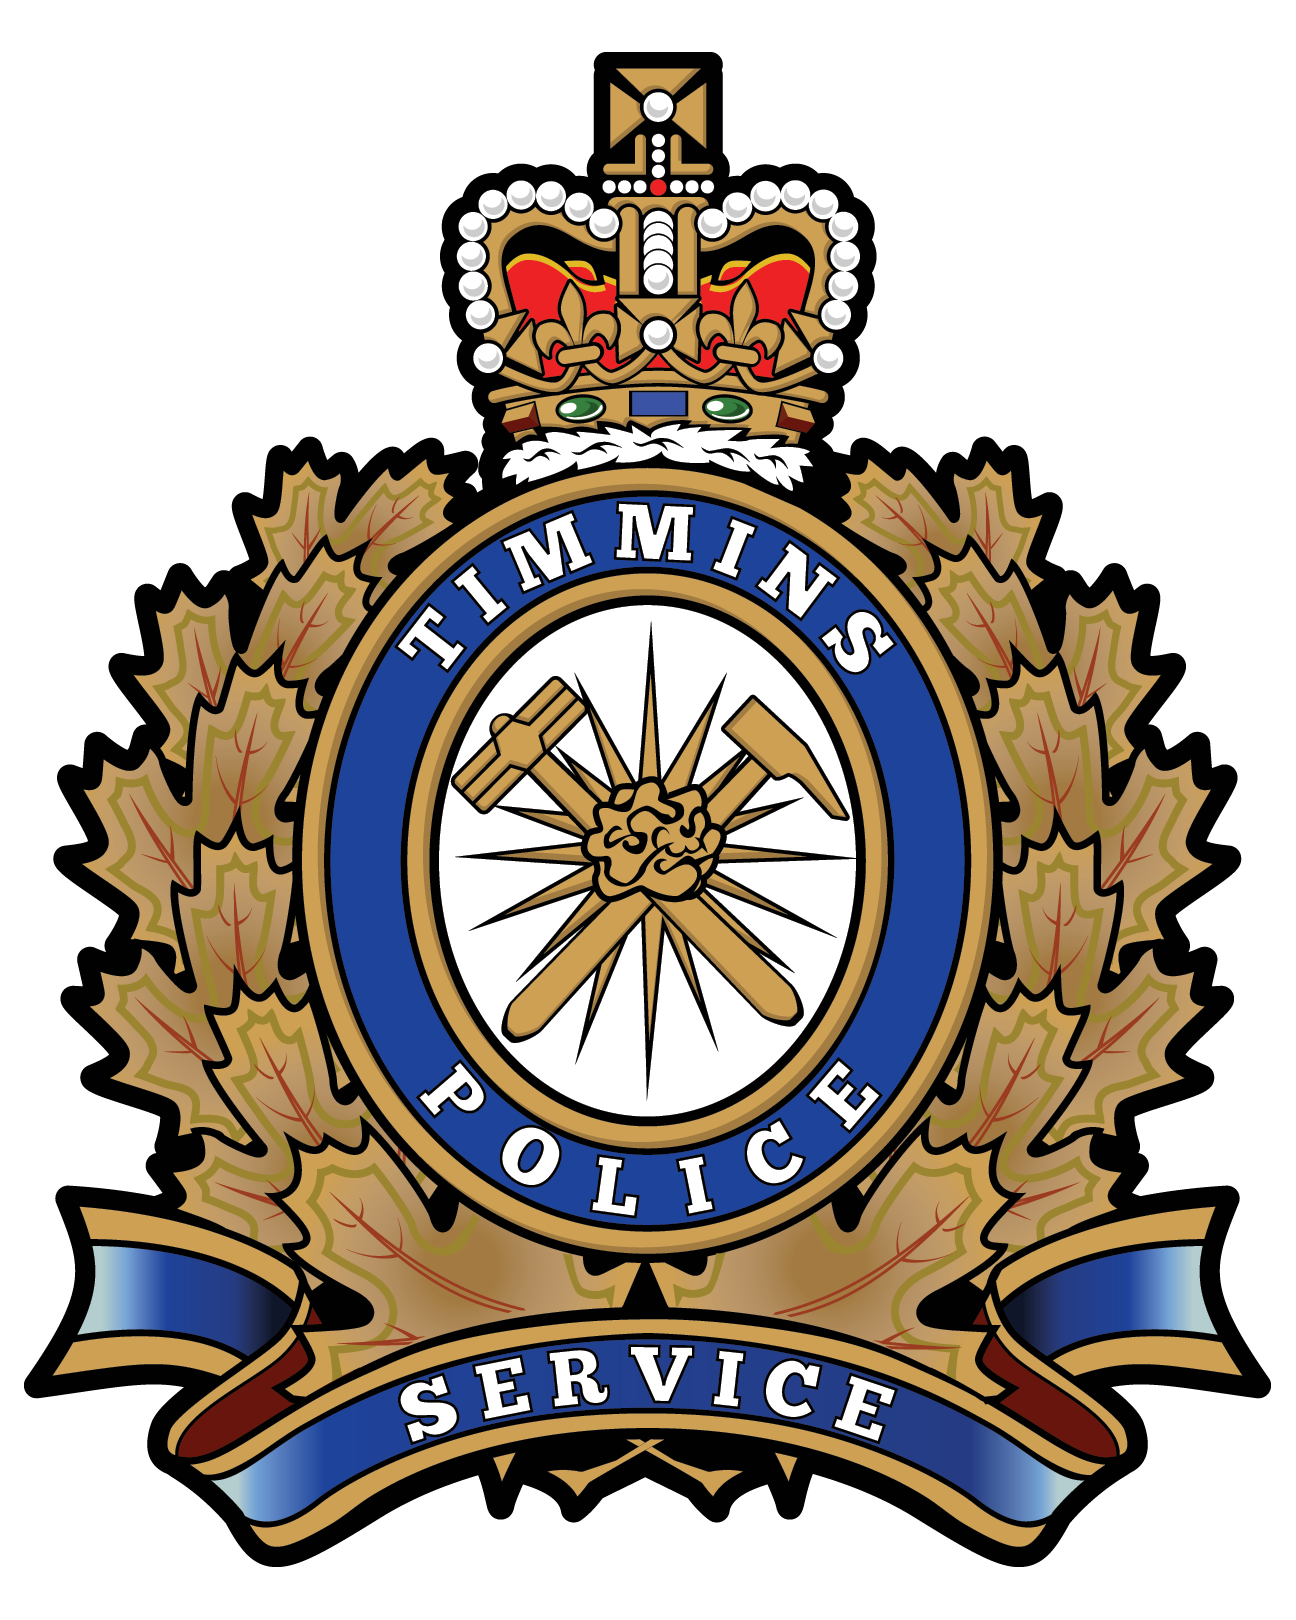 Timmins Police Service Logo showcases the emblem representing the Timmins Police.